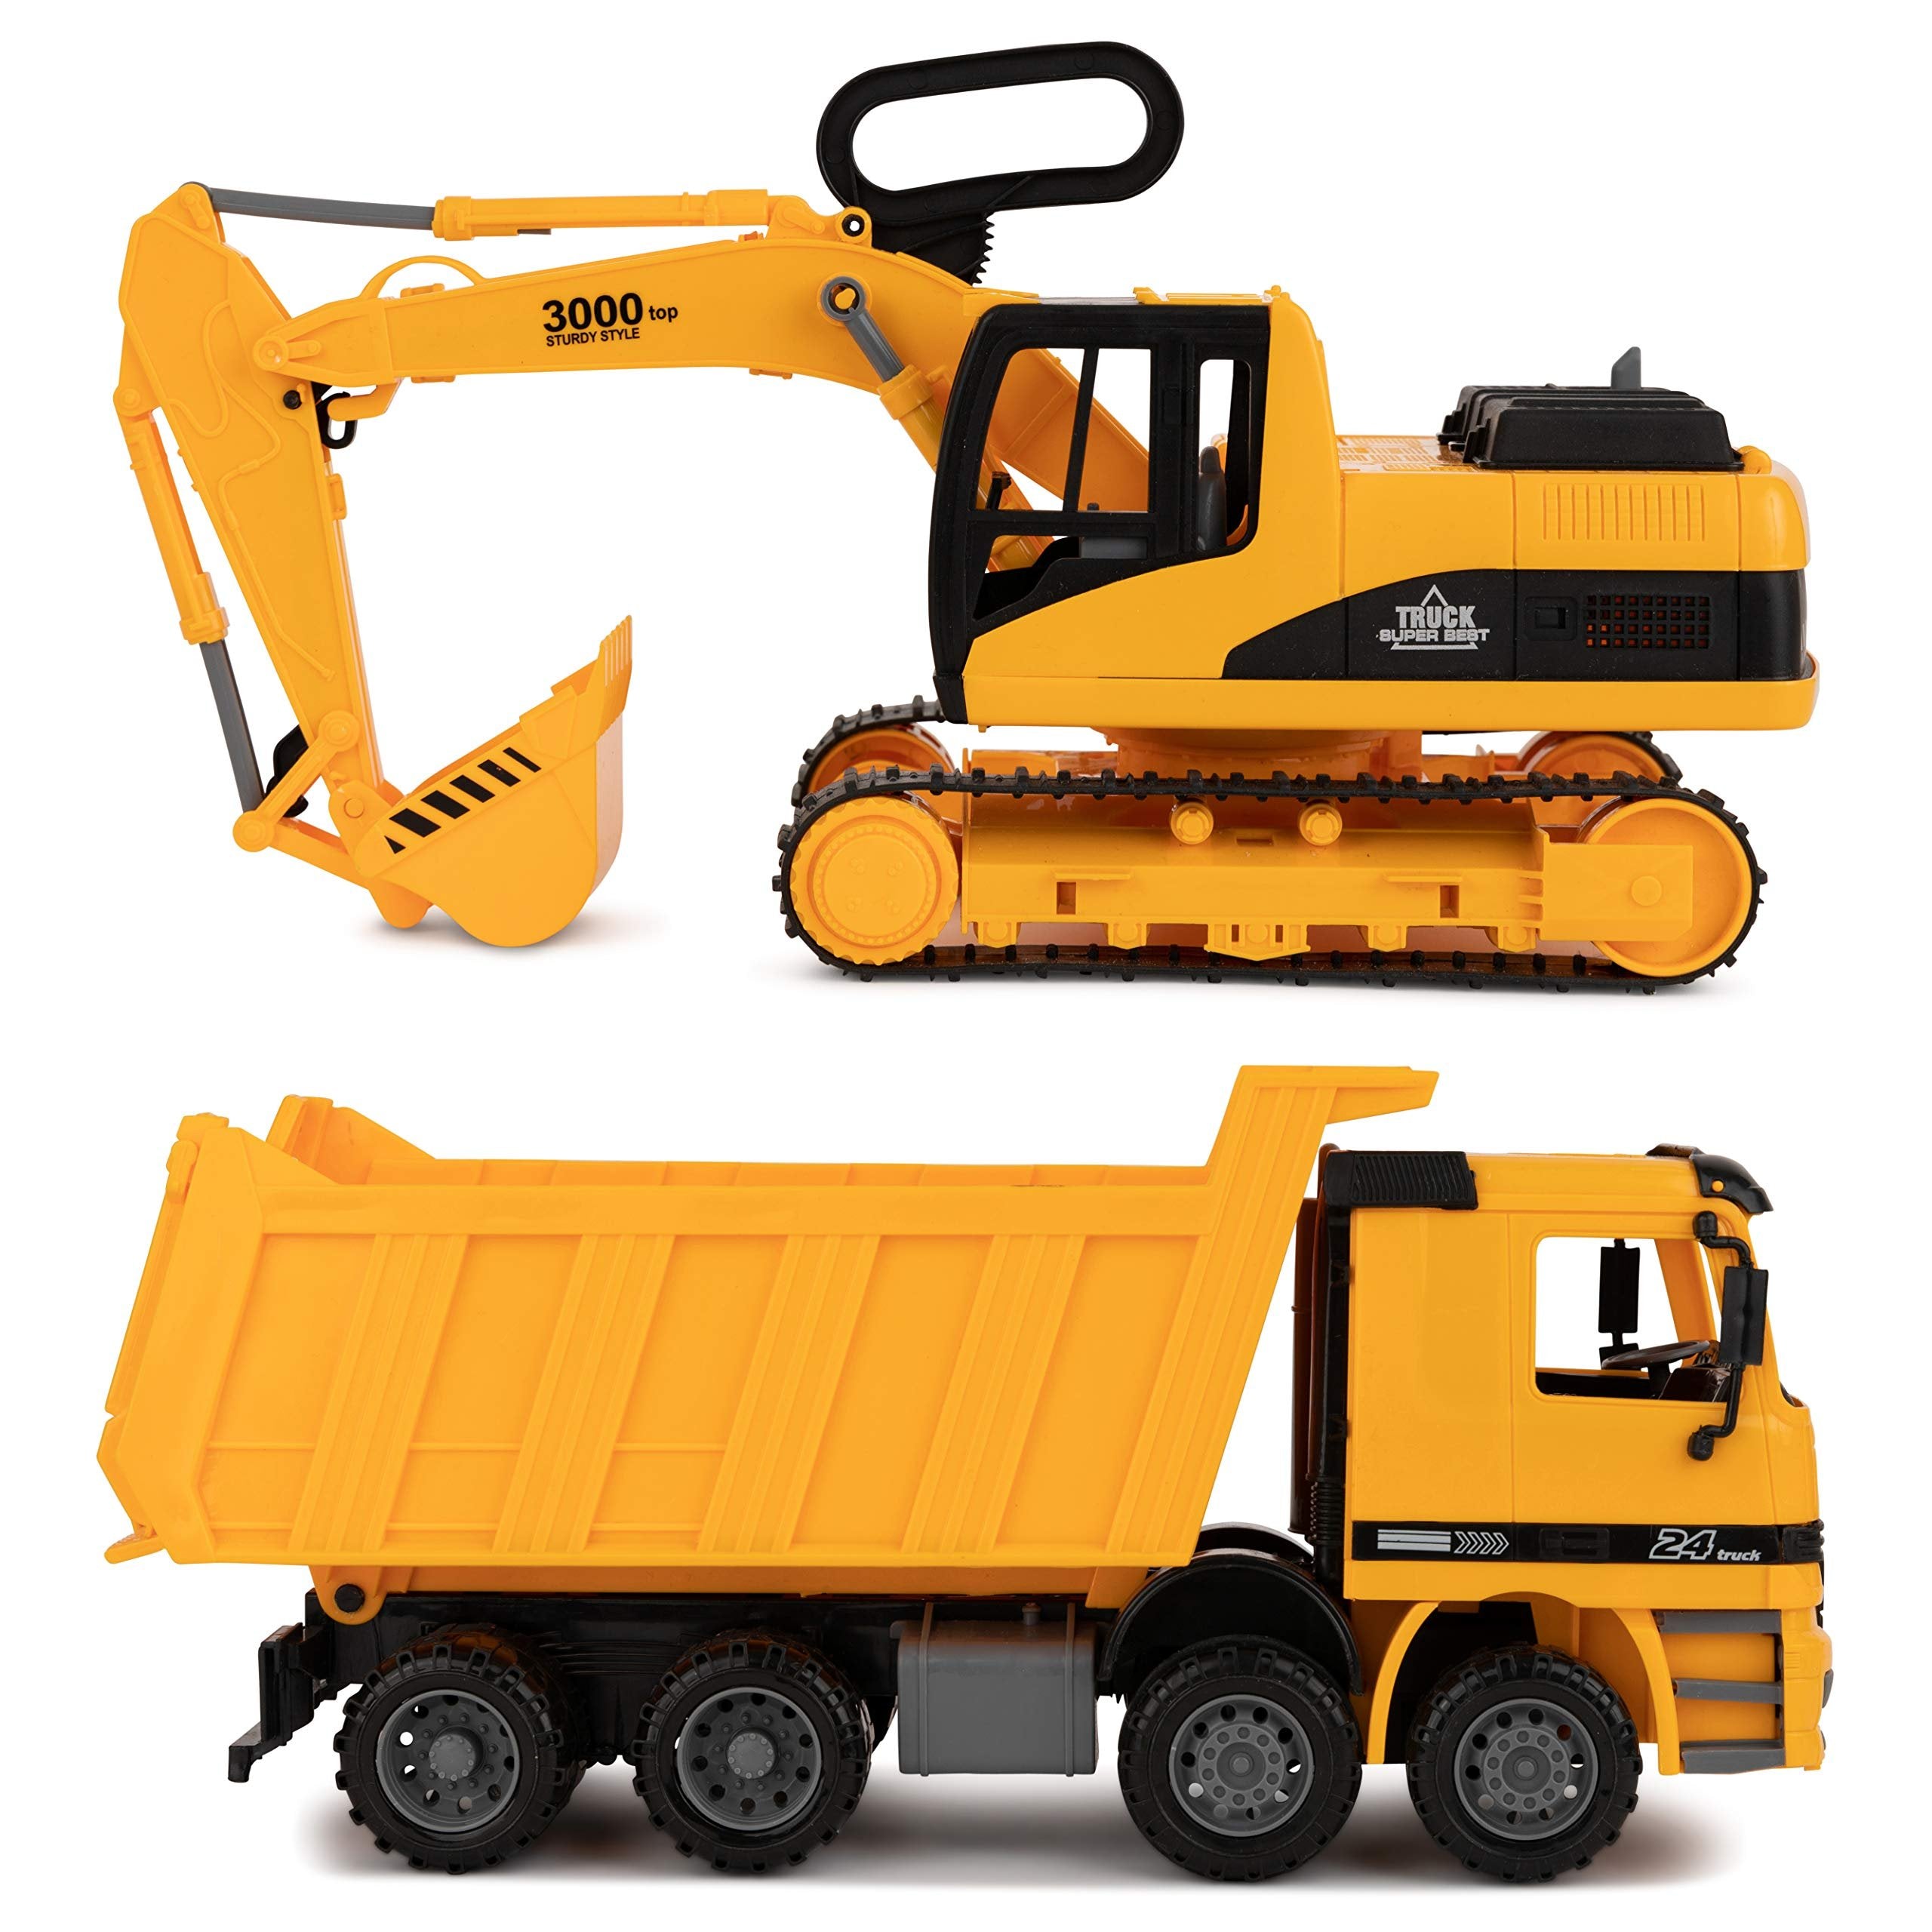 Excavator & Dump Truck Toy for Kids (Set of 2) - Moveable Claw & Lifting Back - Garbage Truck & Bulldozer Digger - Construction Vehicle for Kids & Children by Toy To Enjoy